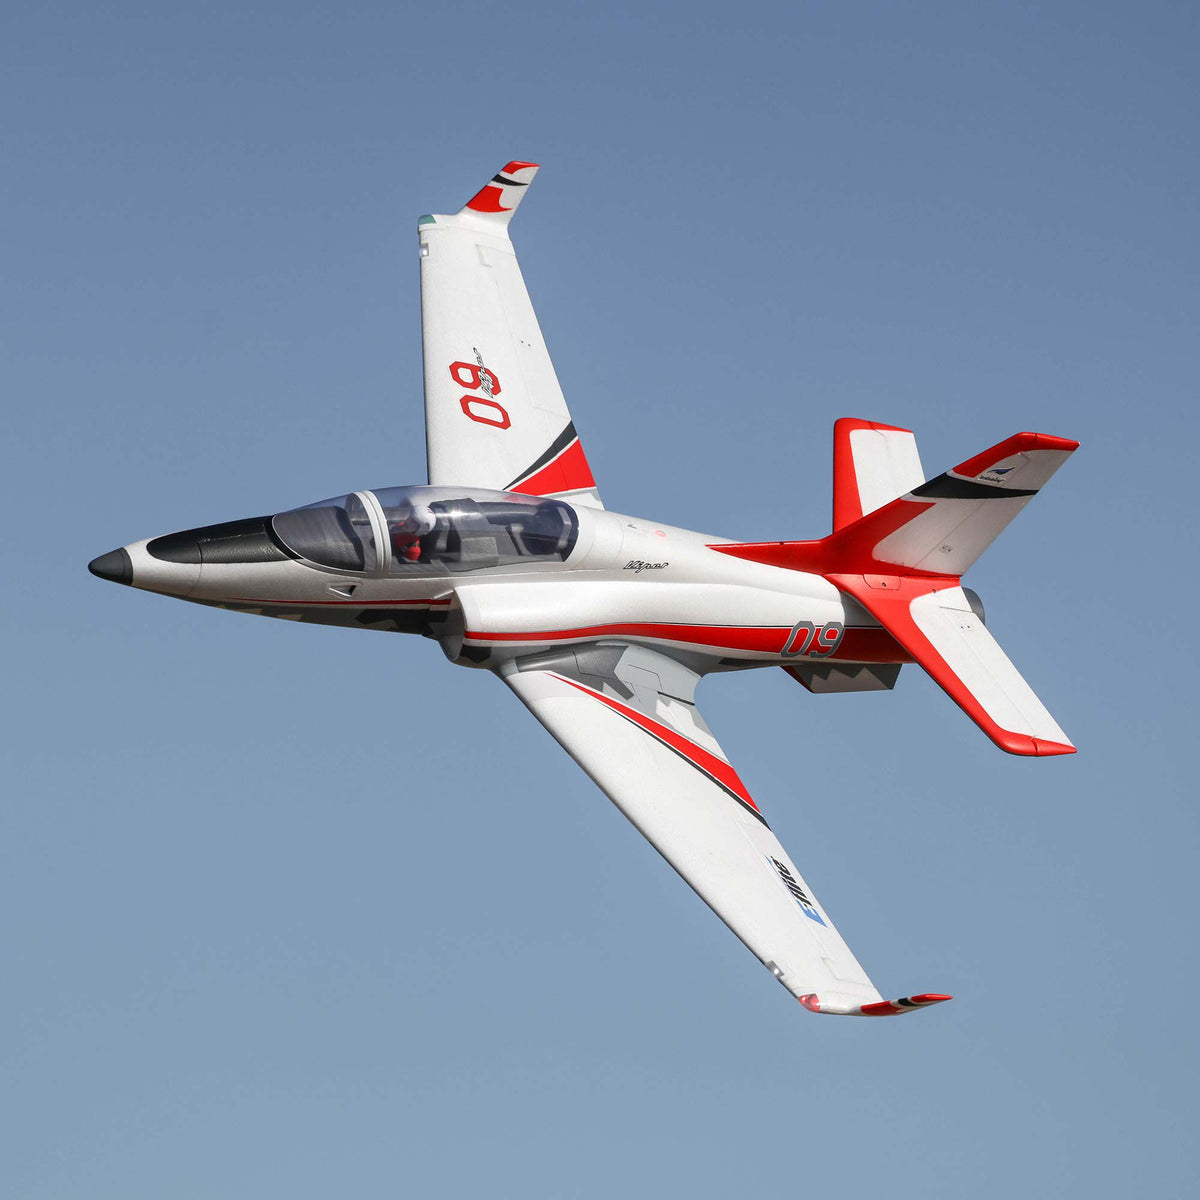 E-flite Viper 90mm EDF Jet BNF Basic with AS3X and SAFE Select, 1400mm (EFL17750)